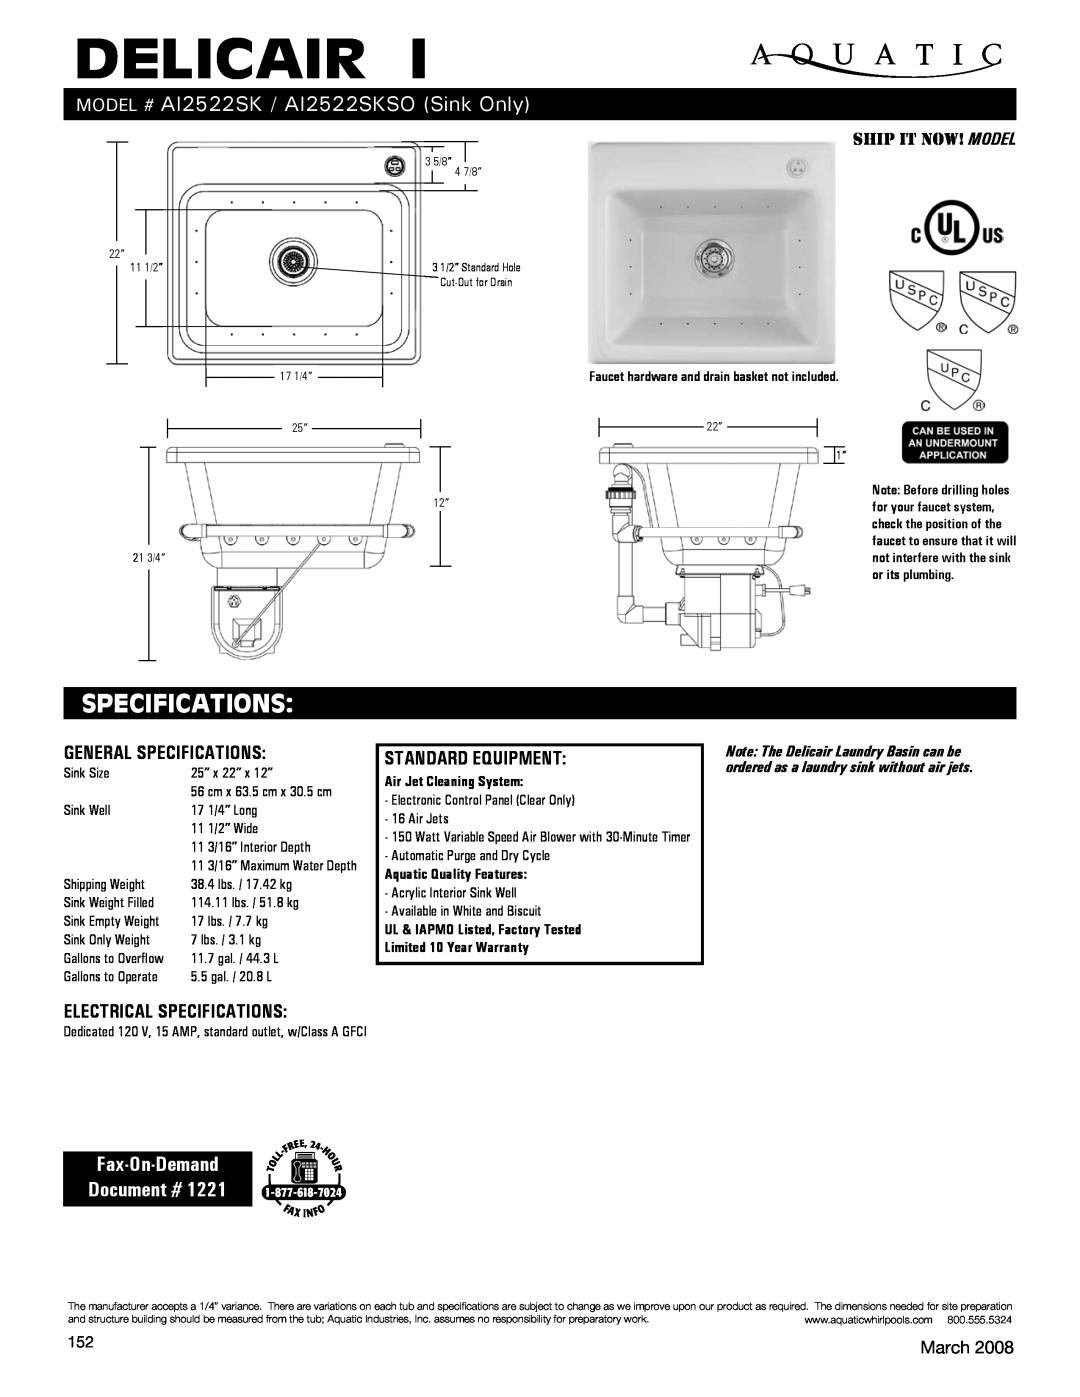 Aquatic specifications delicair, Specifications, model # AI2522SK / AI2522SKSO Sink Only, Fax-On-Demand Document # 